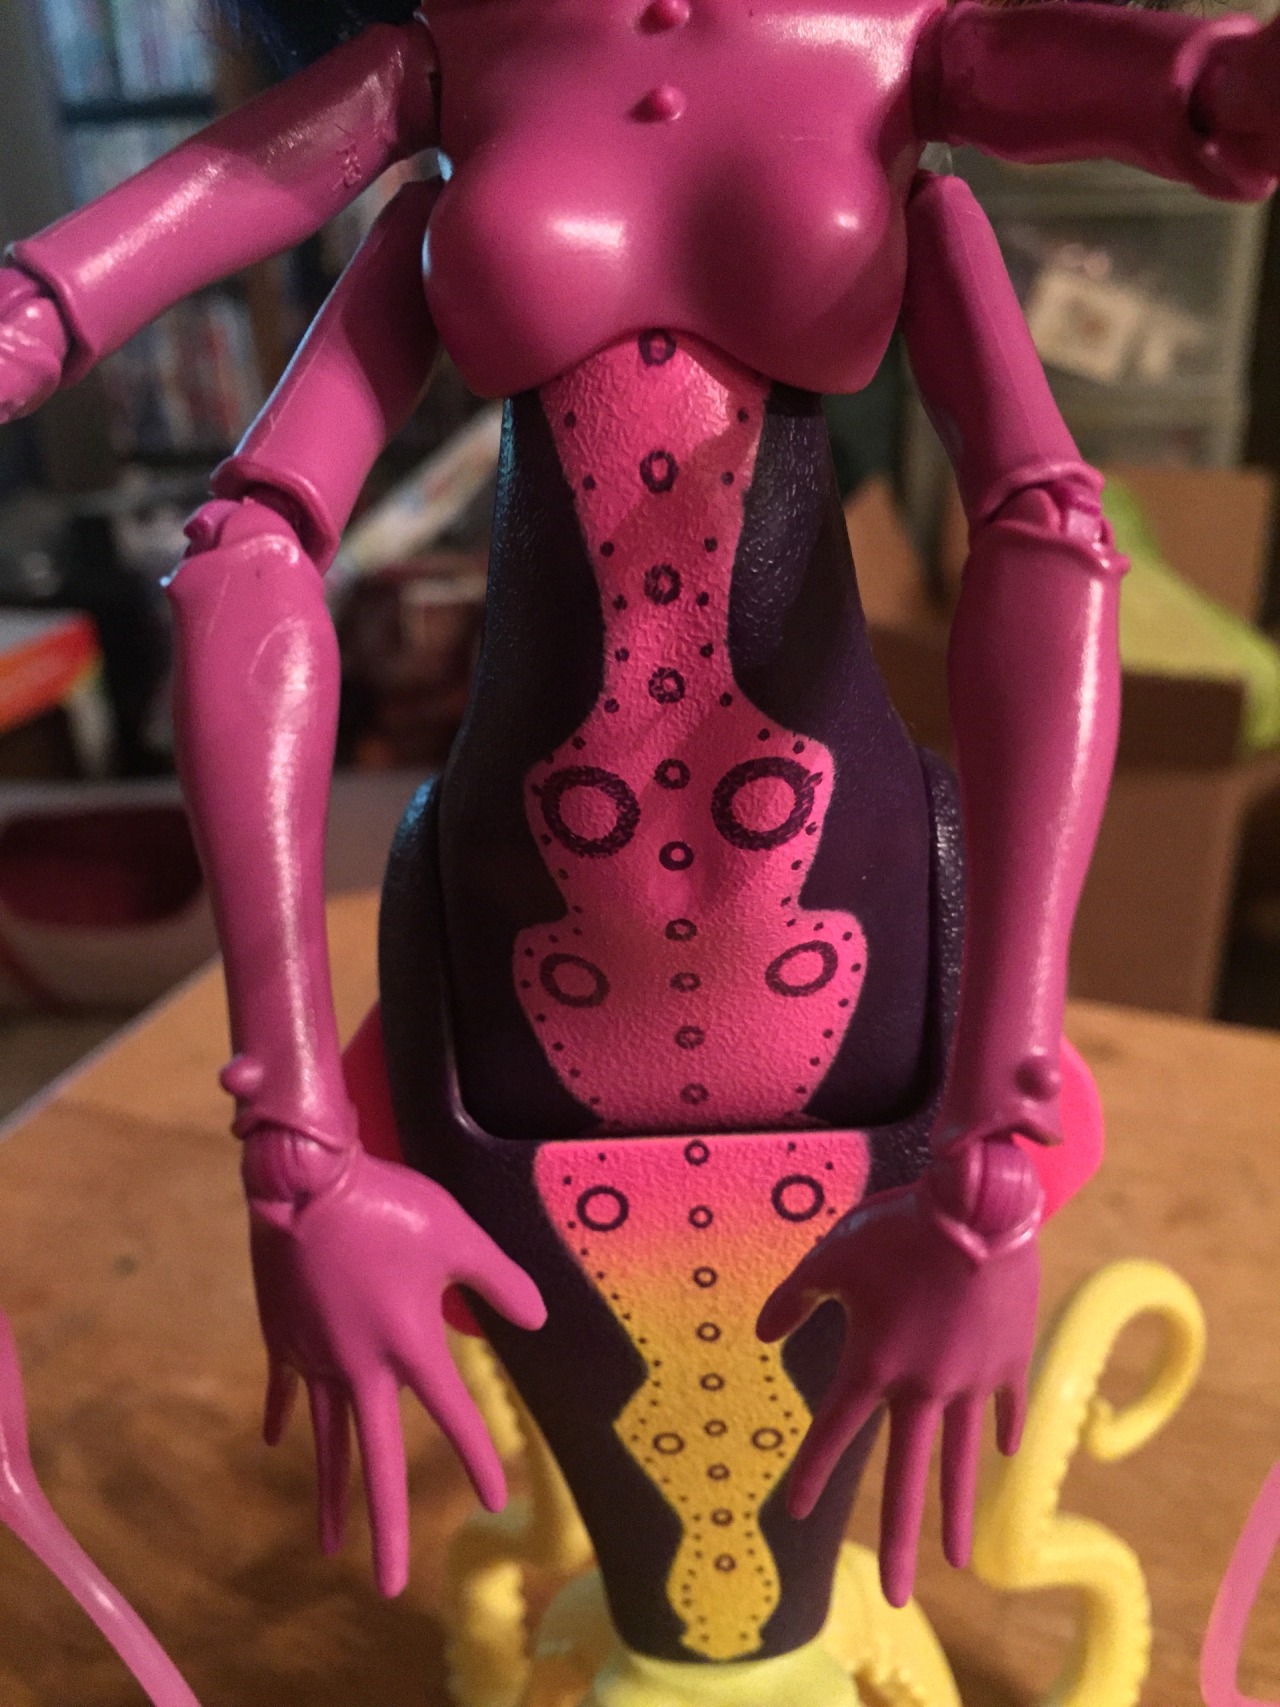 oswinsadventures:

fangtastic-doll-refs:

Here is Kala Mer'ri! There’s a lot of detail on this doll, I love it! She has little suckers on all of her hands, but I chose a picture showing the best defined hands. I also included a body profile pic to show her little tummy pudge. I know it’s so her body curves the same way as other dolls, but I think it’s really cute on her! One thing though, the spikes on her arm means I can’t take the one bracelet off her, which is a little strange. Be careful putting you’re own bracelets on her, they might not be able to come off!
Up next is Kala’s outfit and accessories!

I didnt notice the suckers on the hands! That rocks!